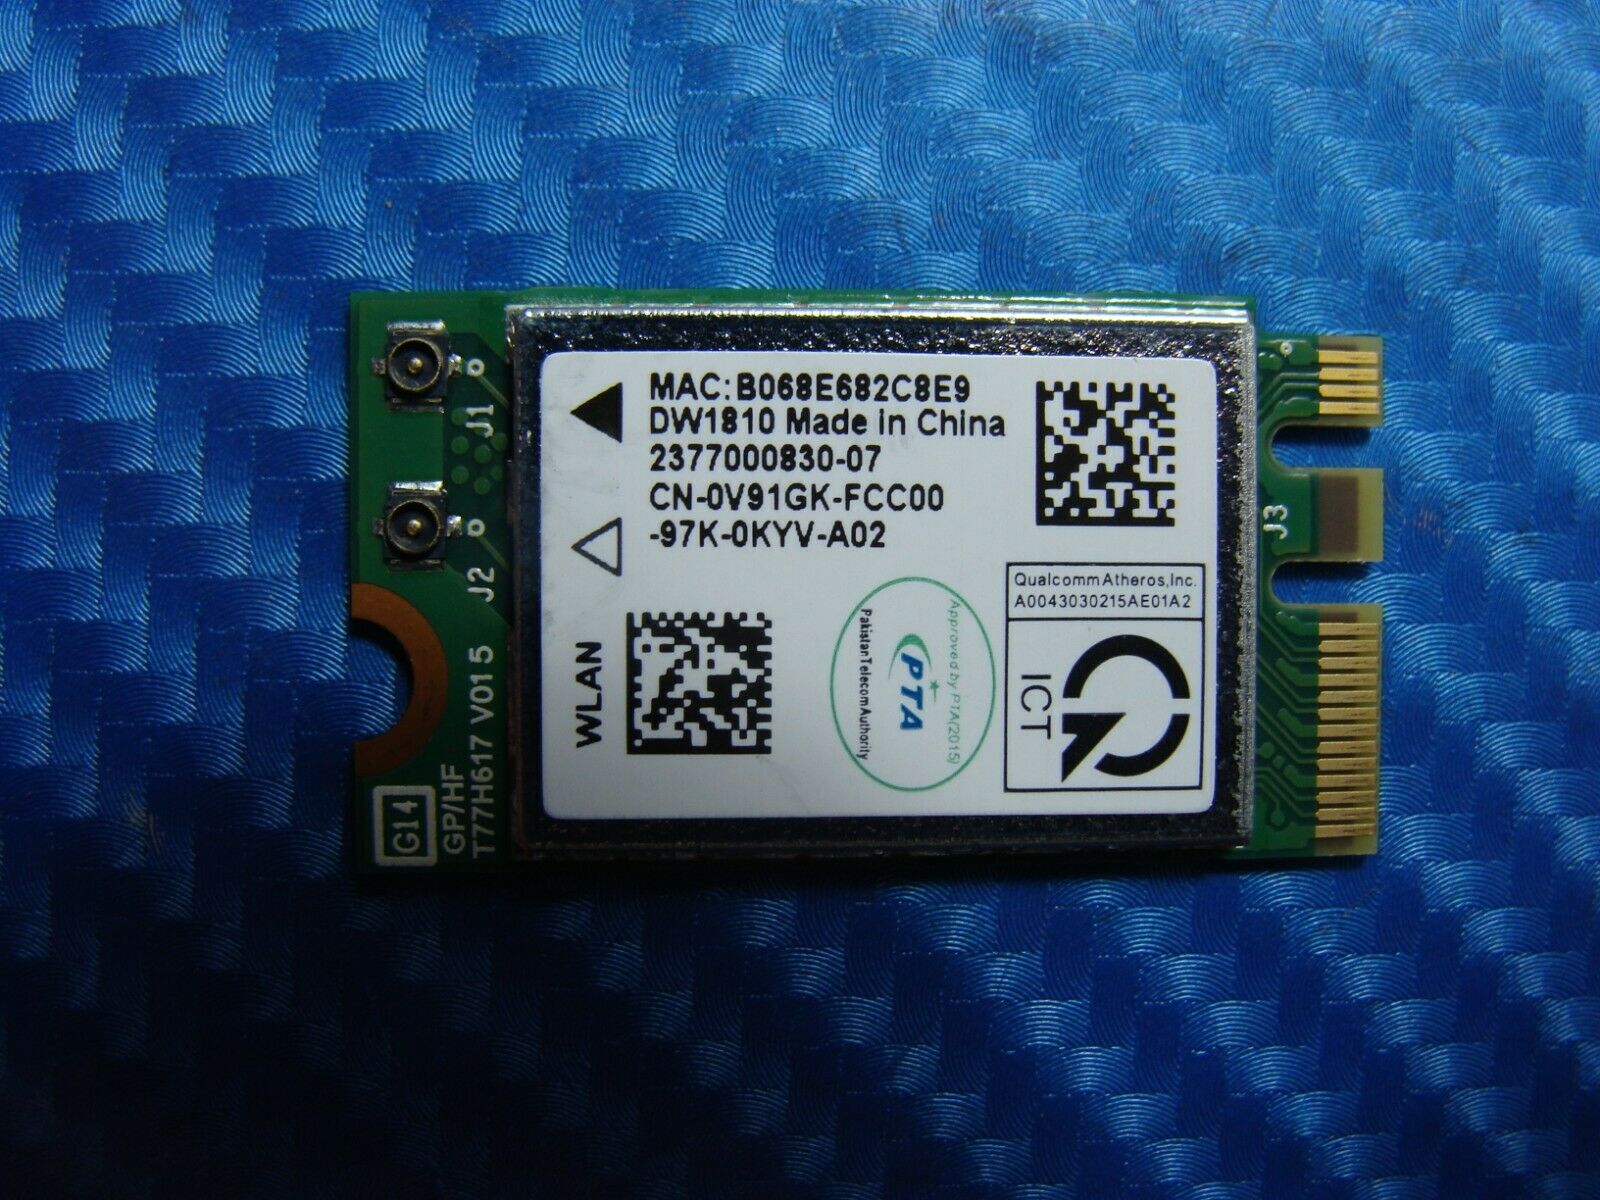 Dell Inspiron 3584 15.6" Genuine Wireless WiFi Card QCNFA435 V91GK ER* - Laptop Parts - Buy Authentic Computer Parts - Top Seller Ebay